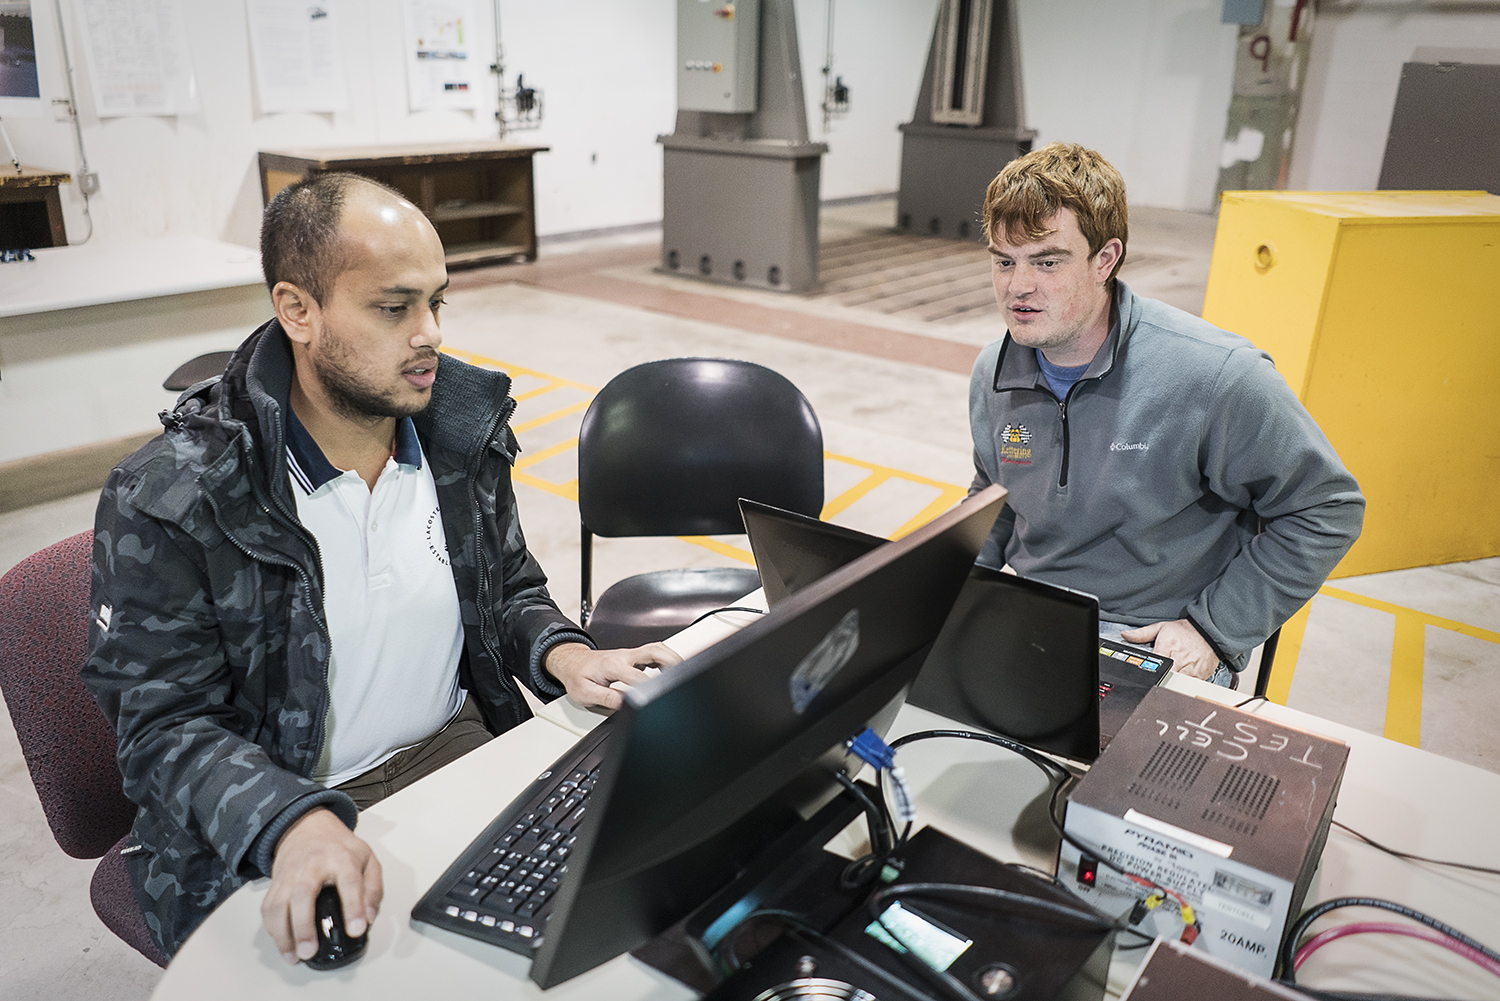 Flint, MI - Friday, November 10, 2017: Project coordinators Shobit Sharma, 26 (left), and Alex Rath, 22, verify the connection between the server and Chevrolet Bolt in the garage at Kettering University that is being used to house the vehicle for the